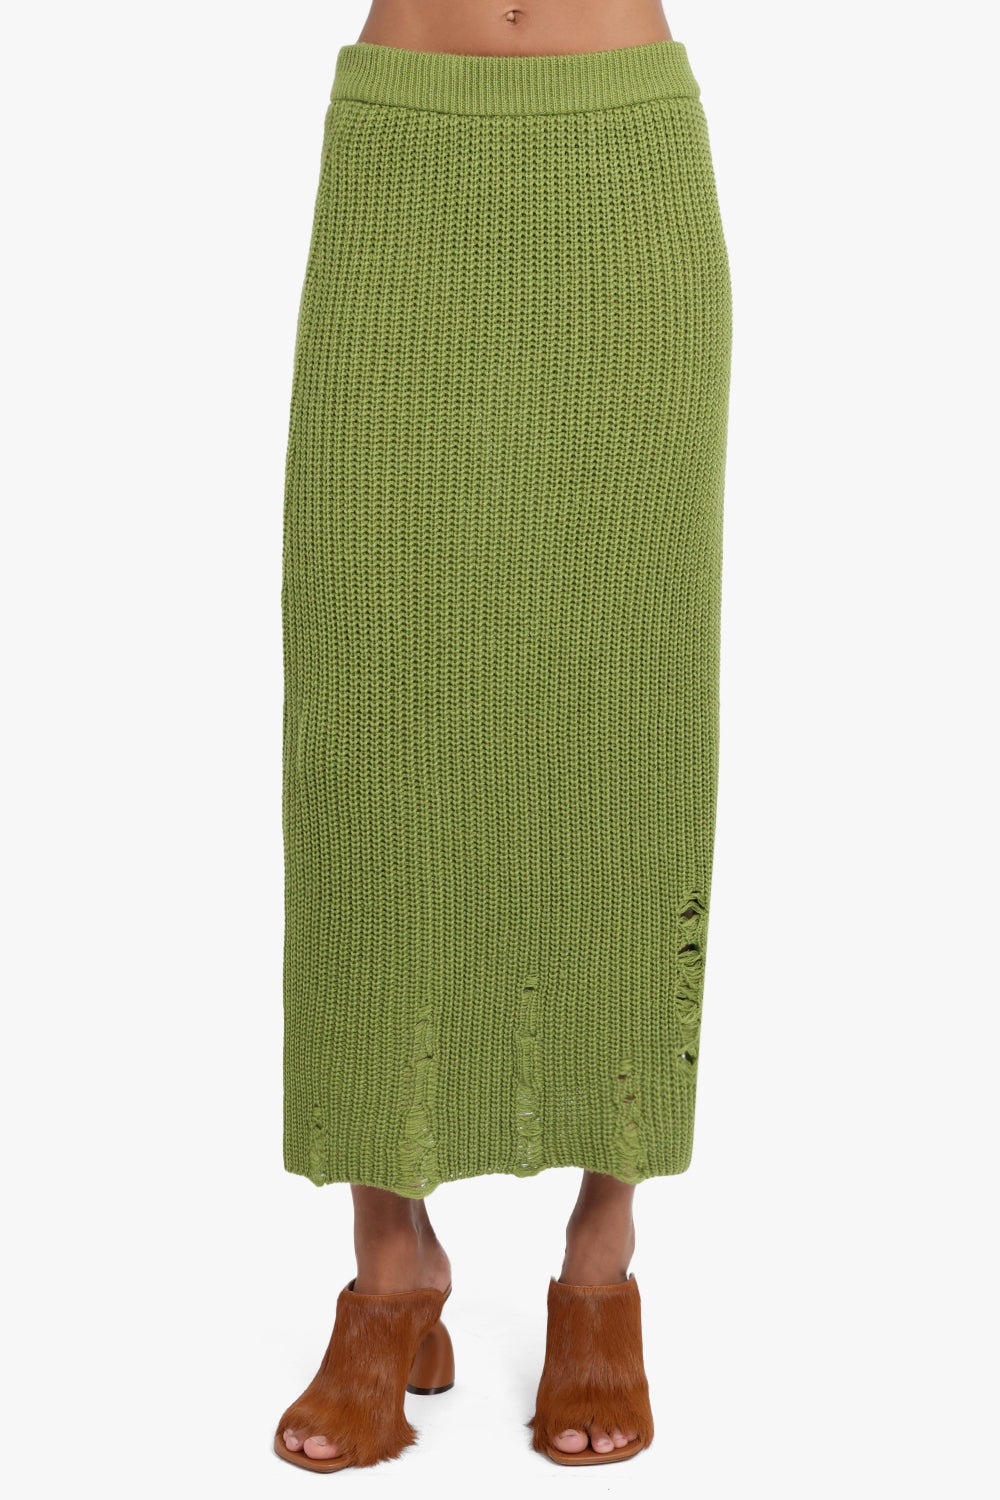 DISTRESSED SKIRT IN CHAIN MAIL | GREEN - 3